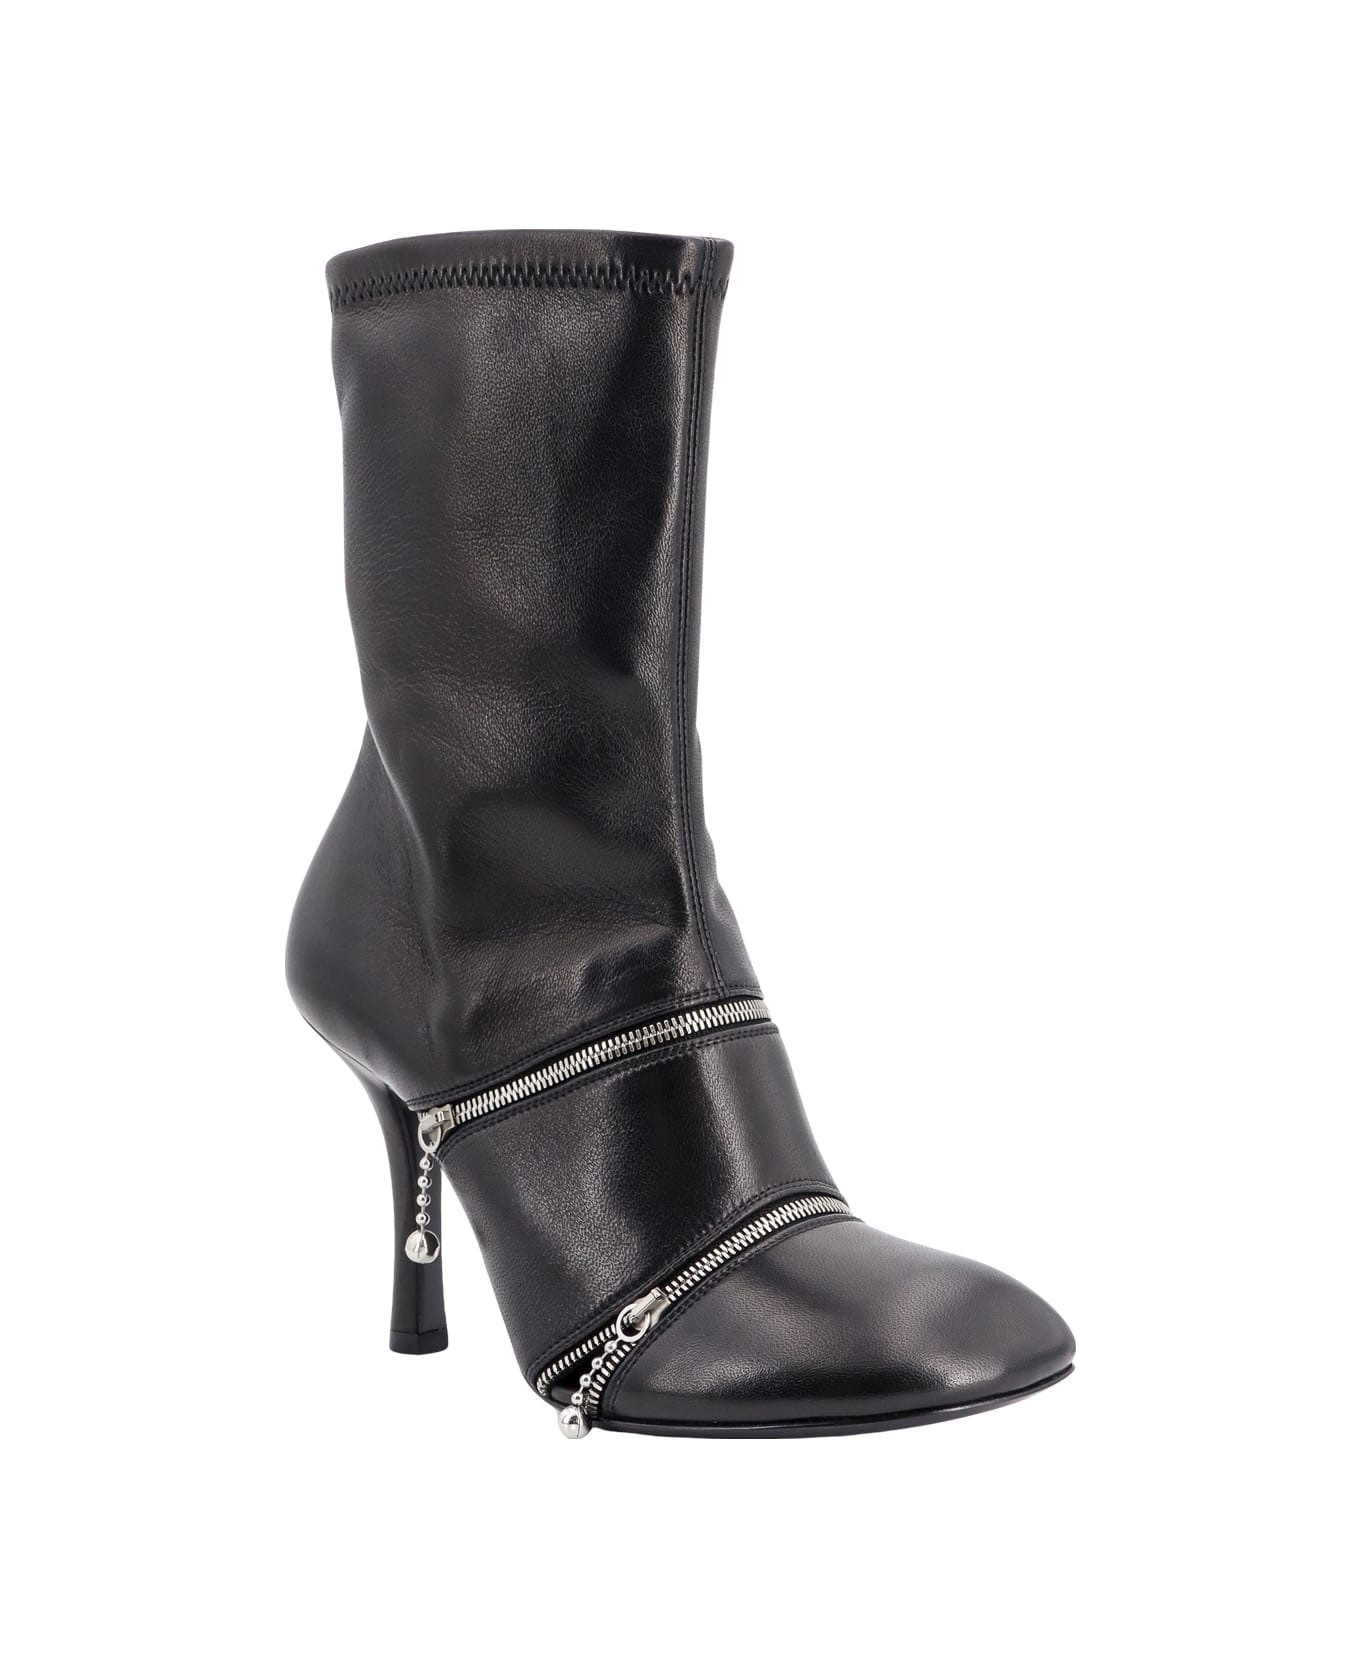 Burberry Peep Ankle Boots - Black ブーツ